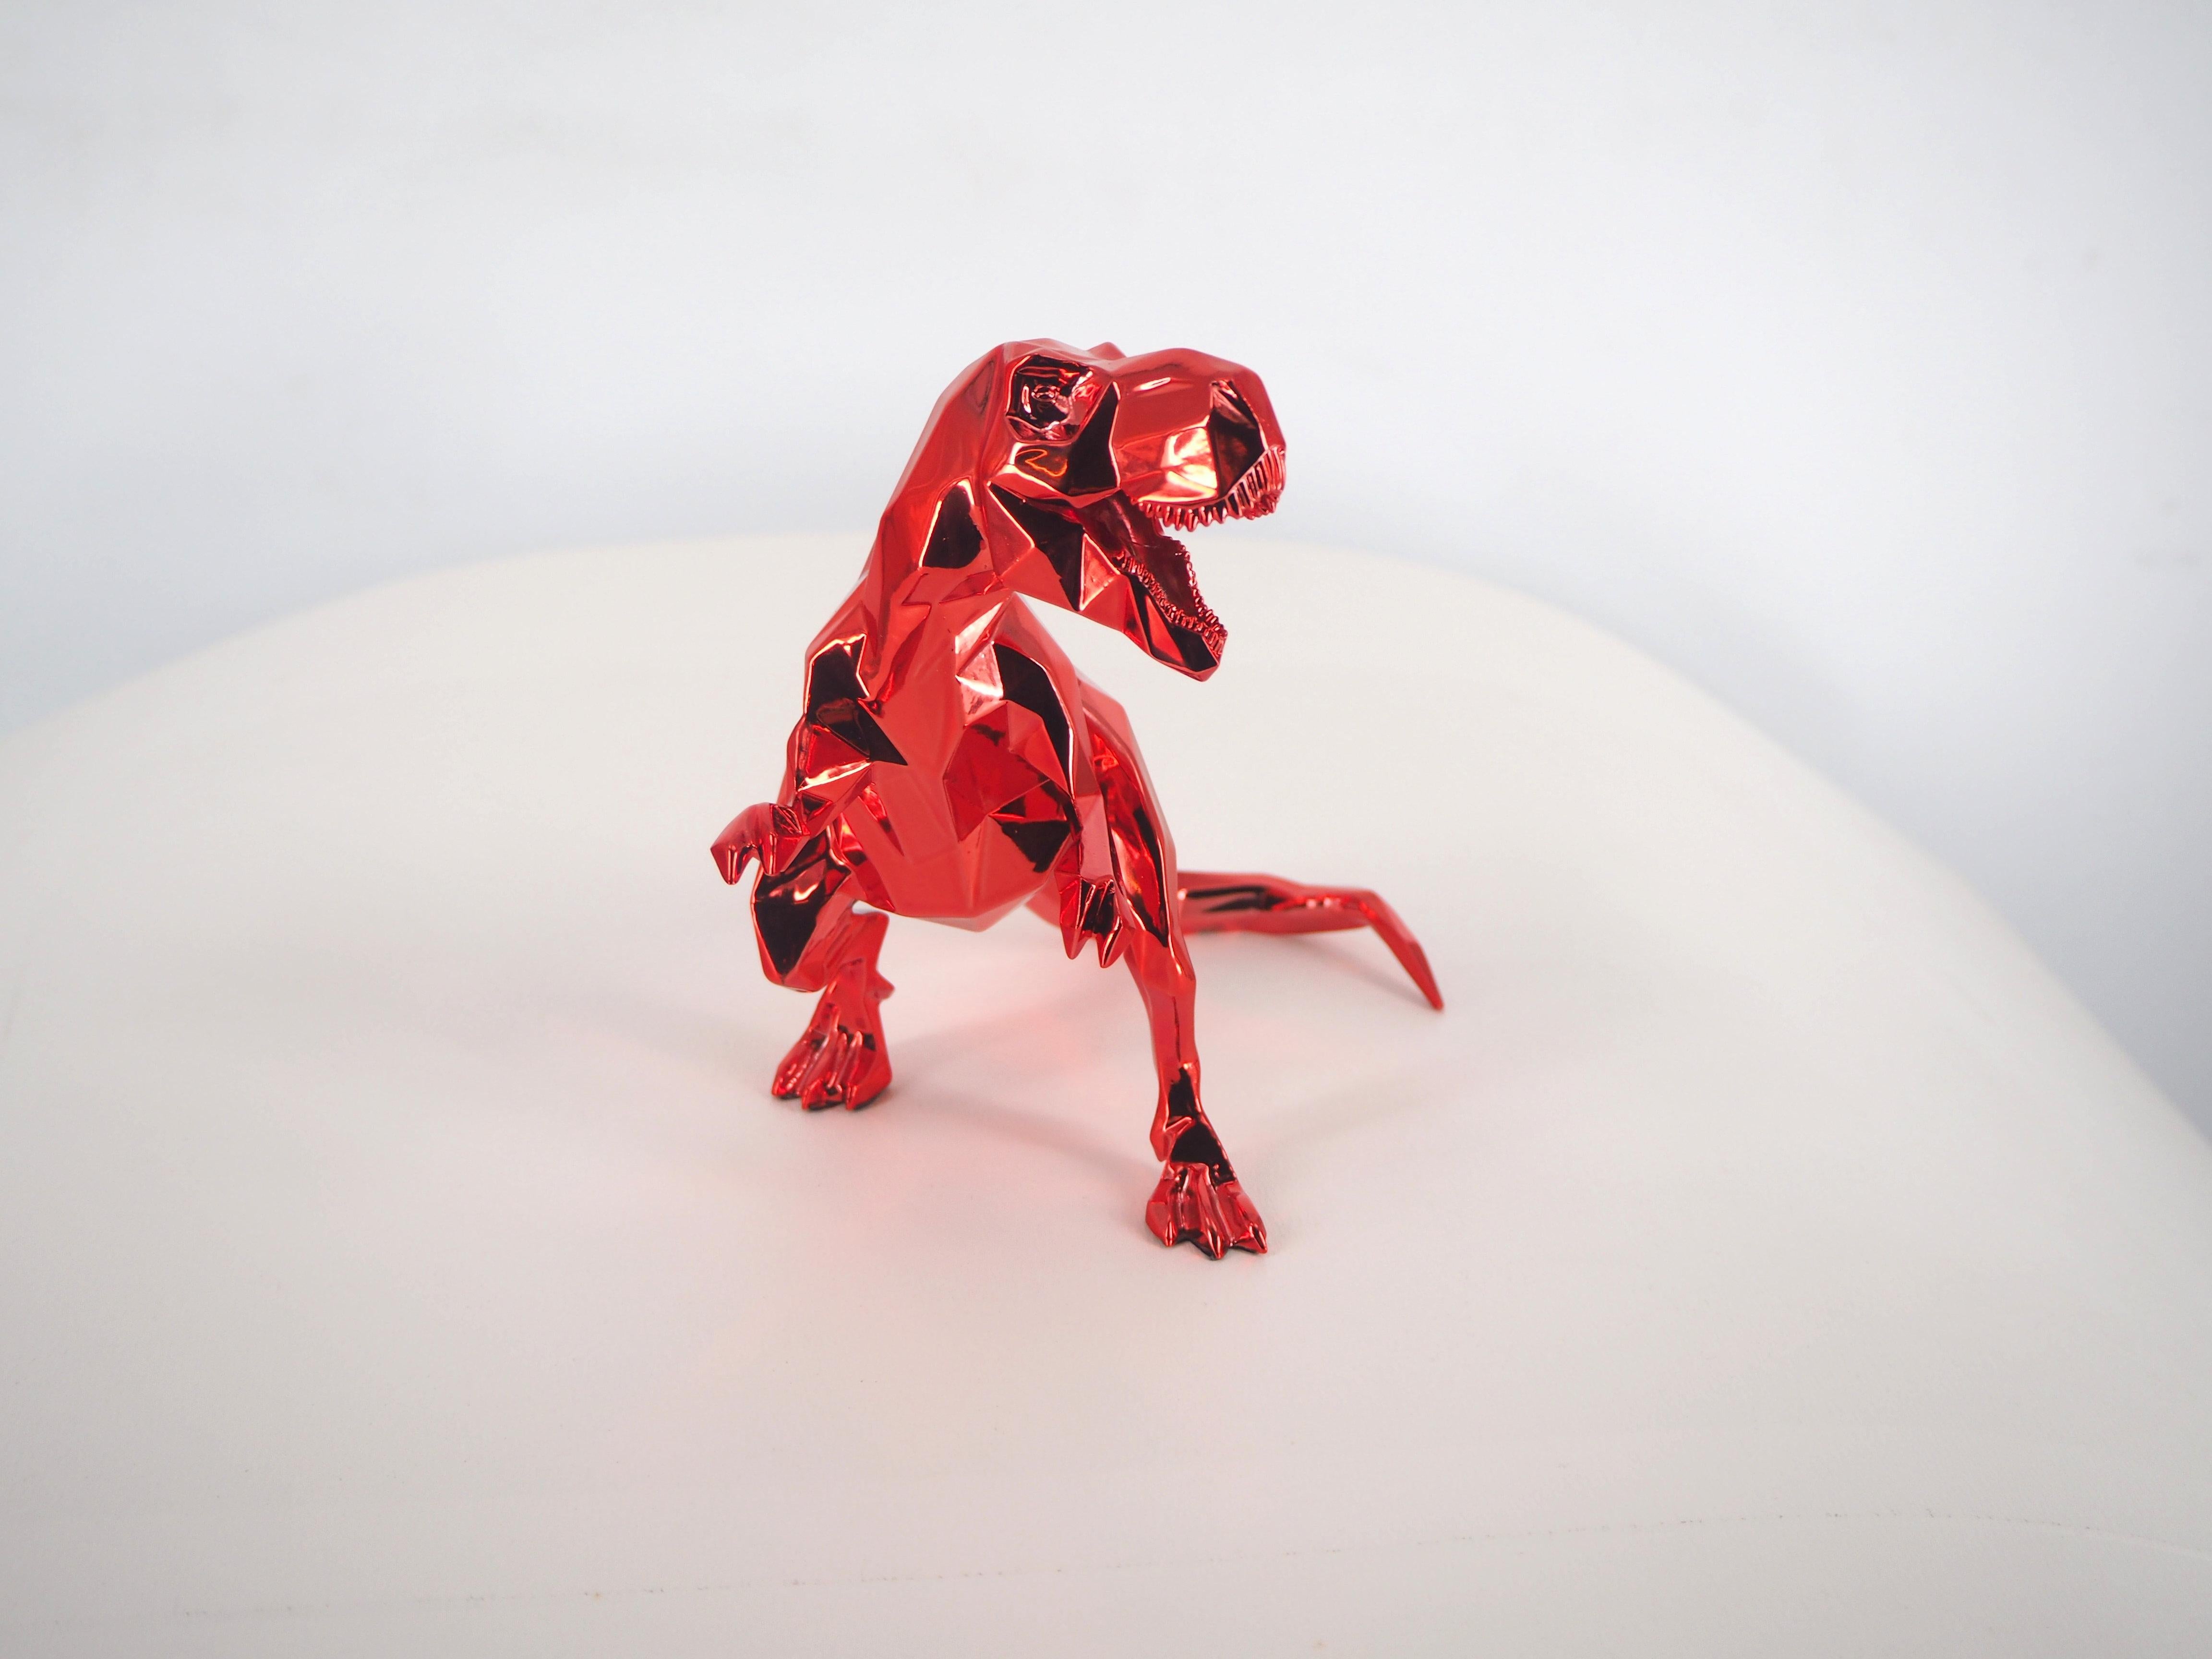 T-Rex (Red Edition) - Sculpture in original box with artist certificate For Sale 1